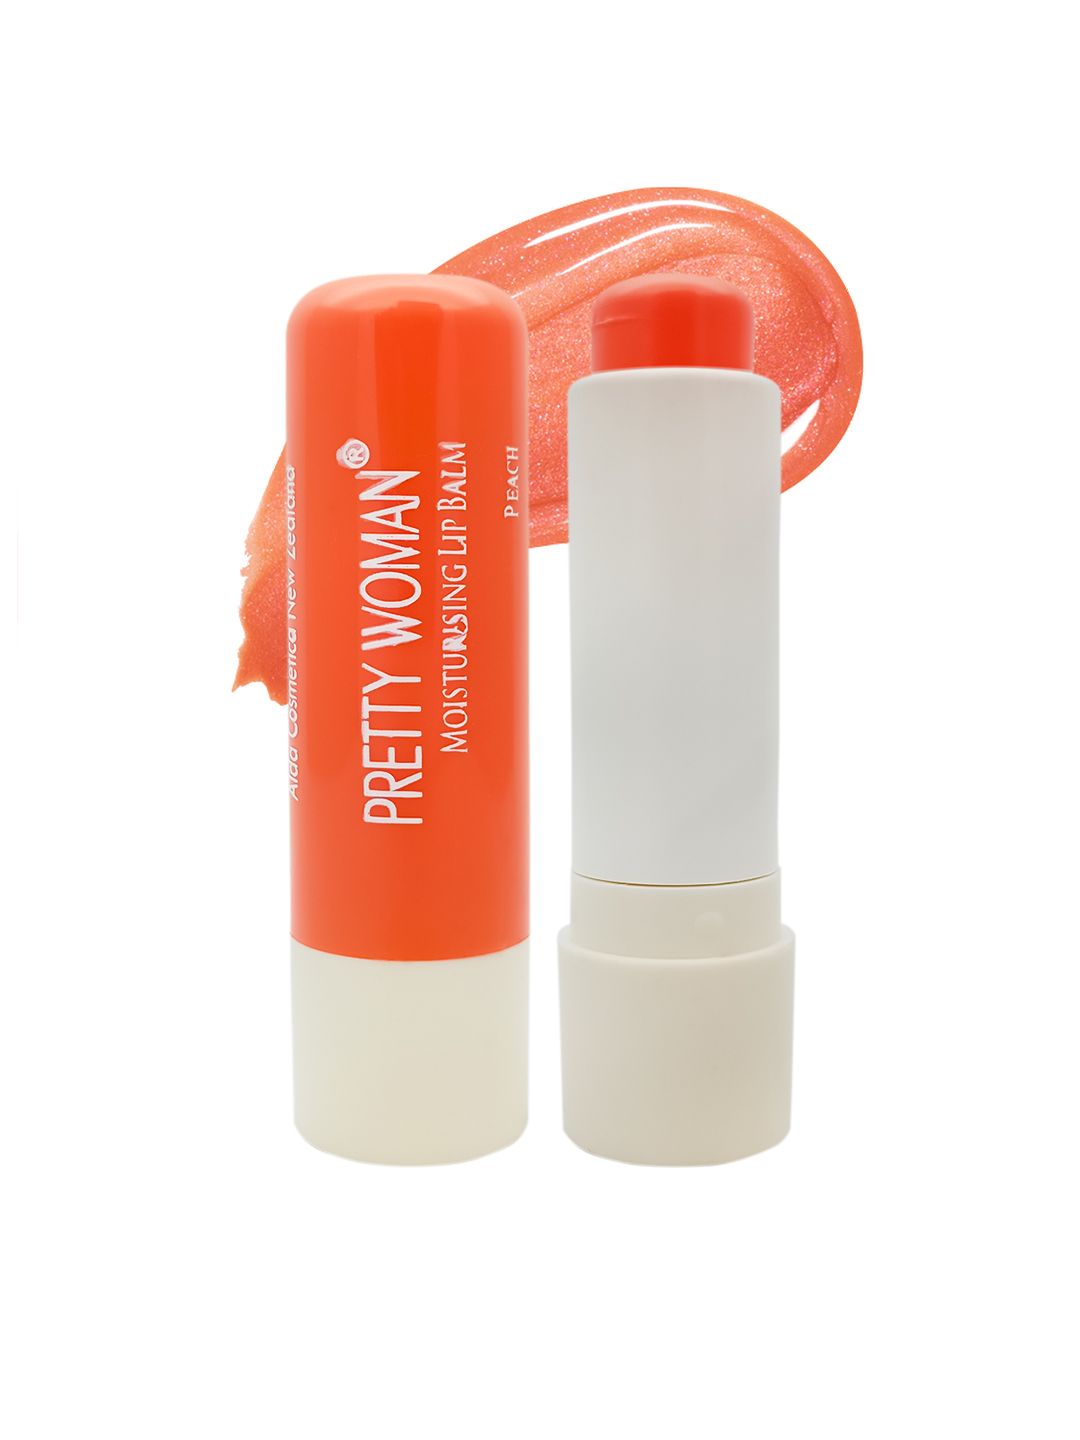 Pretty Woman Moisturizing Peach Tinted Lip Balm for Dry & Chapped Lips Price in India